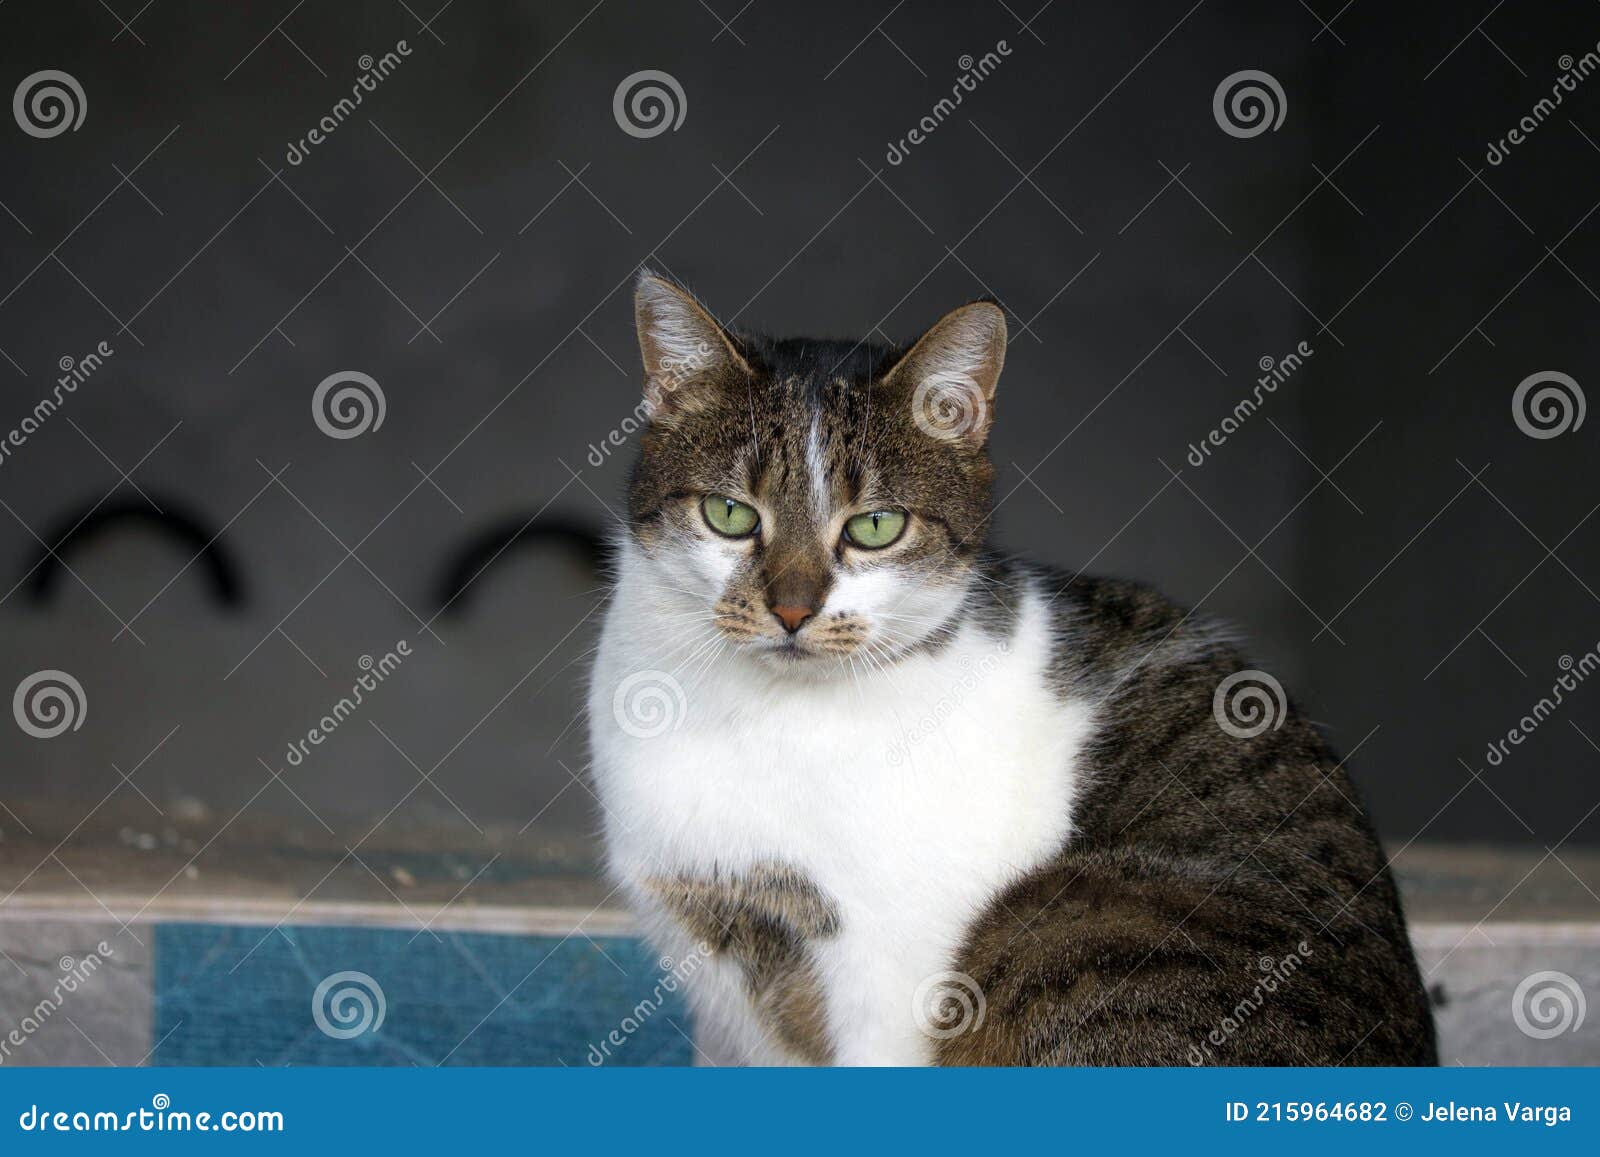 12 278 Cat Shelter Photos Free Royalty Free Stock Photos From Dreamstime